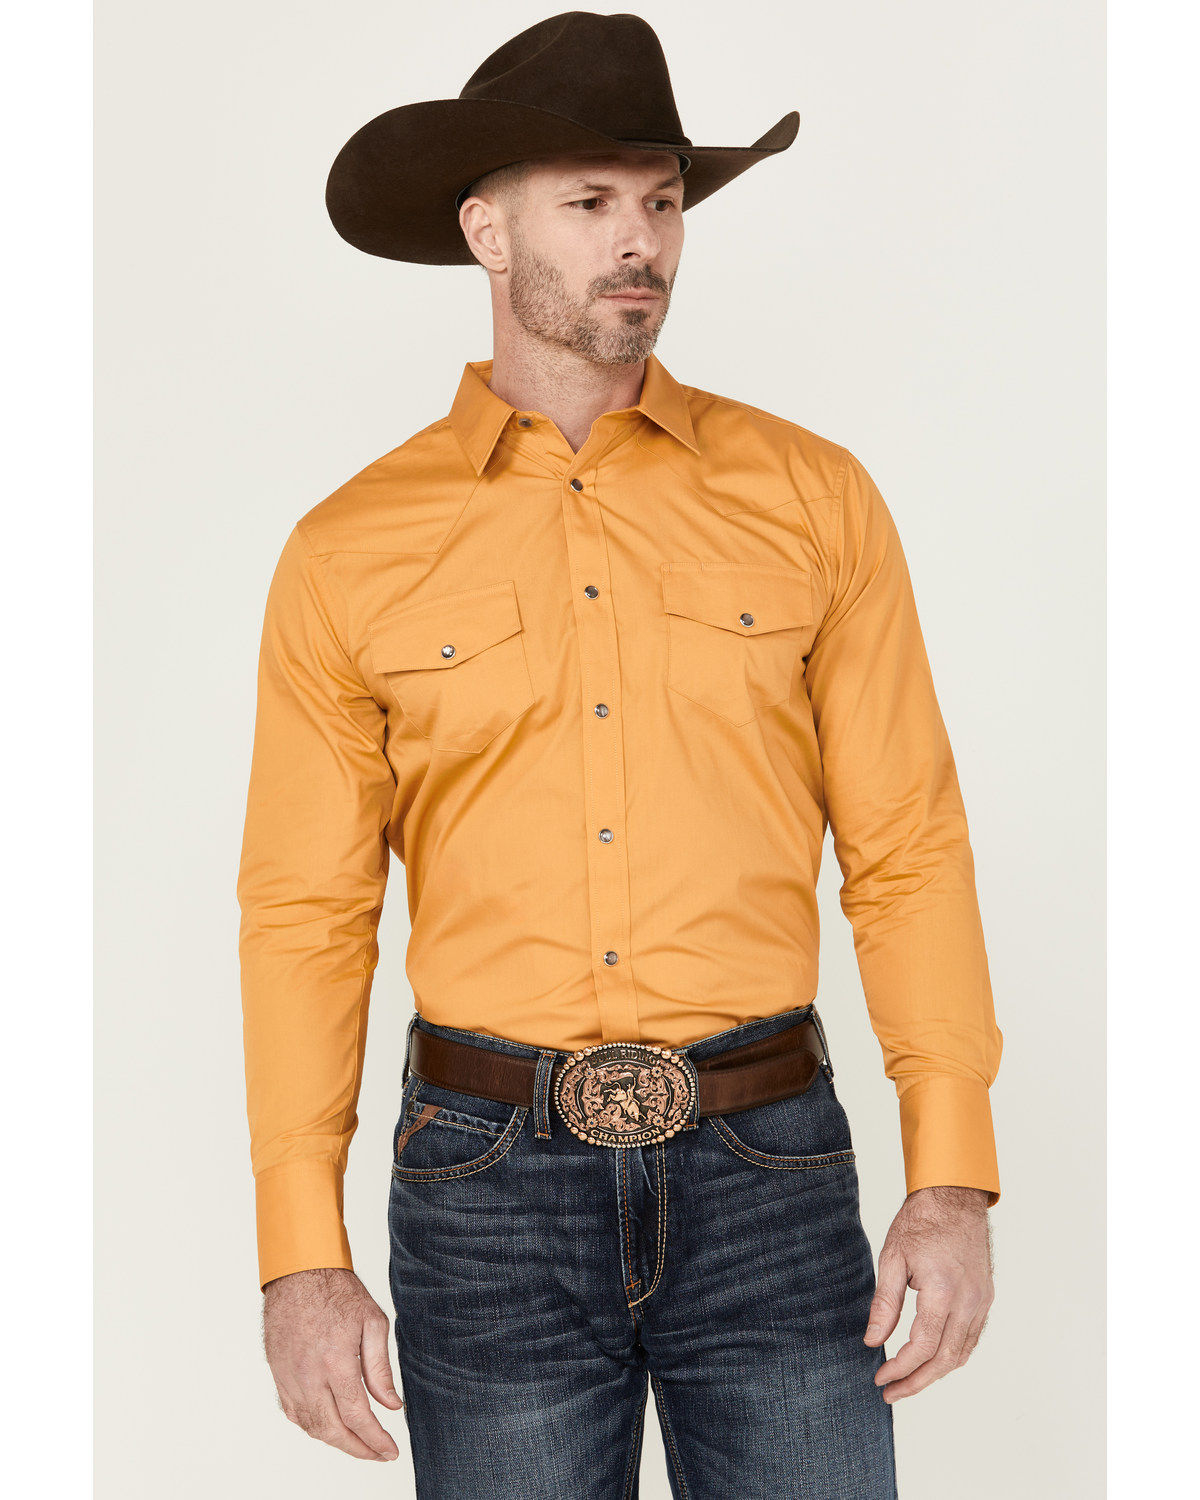 Gibson Men's Solid Long Sleeve Pearl Snap Western Shirt